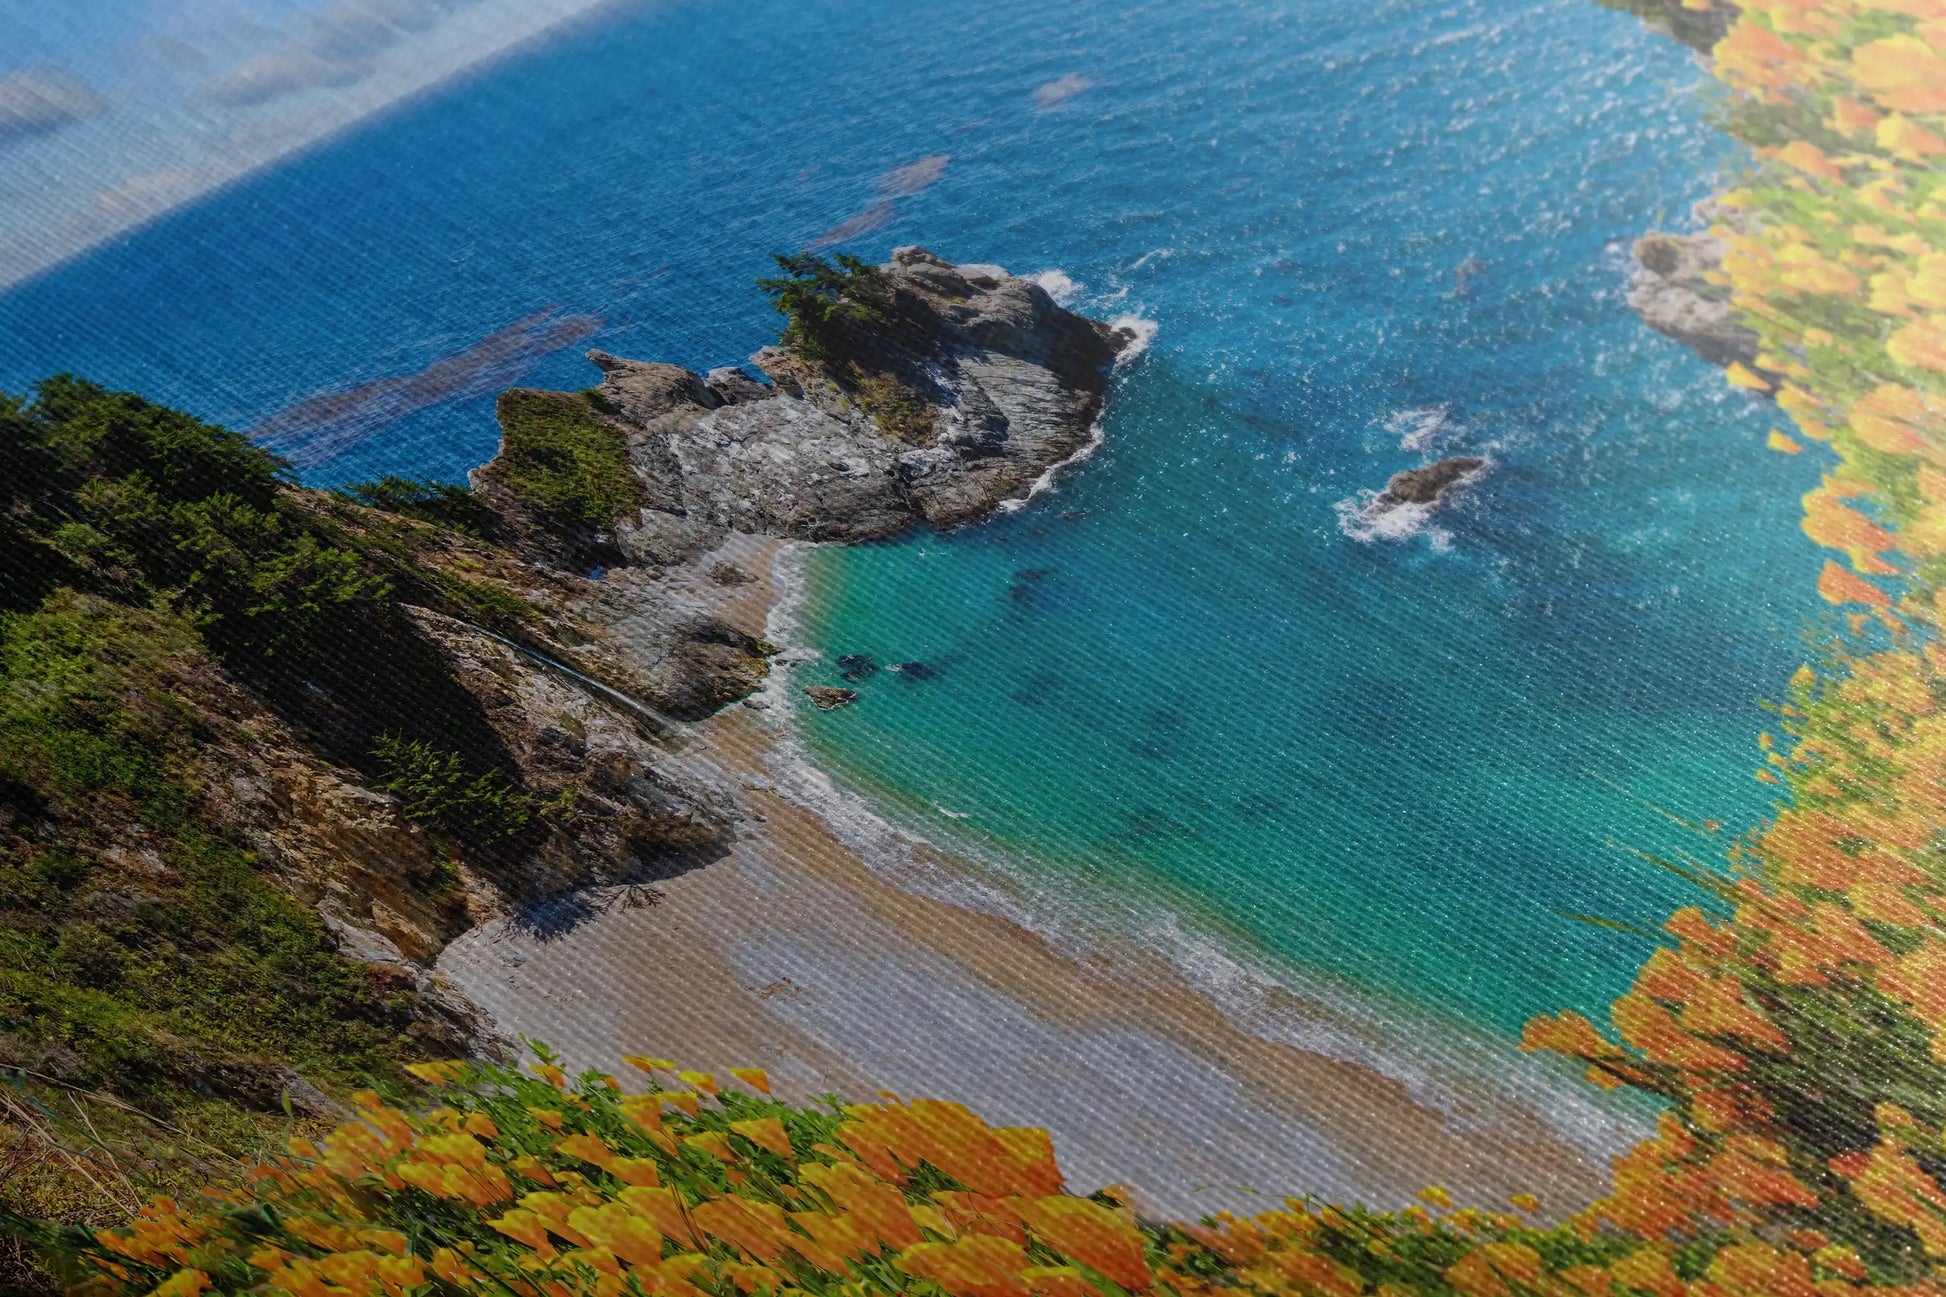 Detailed close-up of canvas wall art texture with the image of McWay Falls at Big Sur, accentuating the orange wildflowers and turquoise sea.